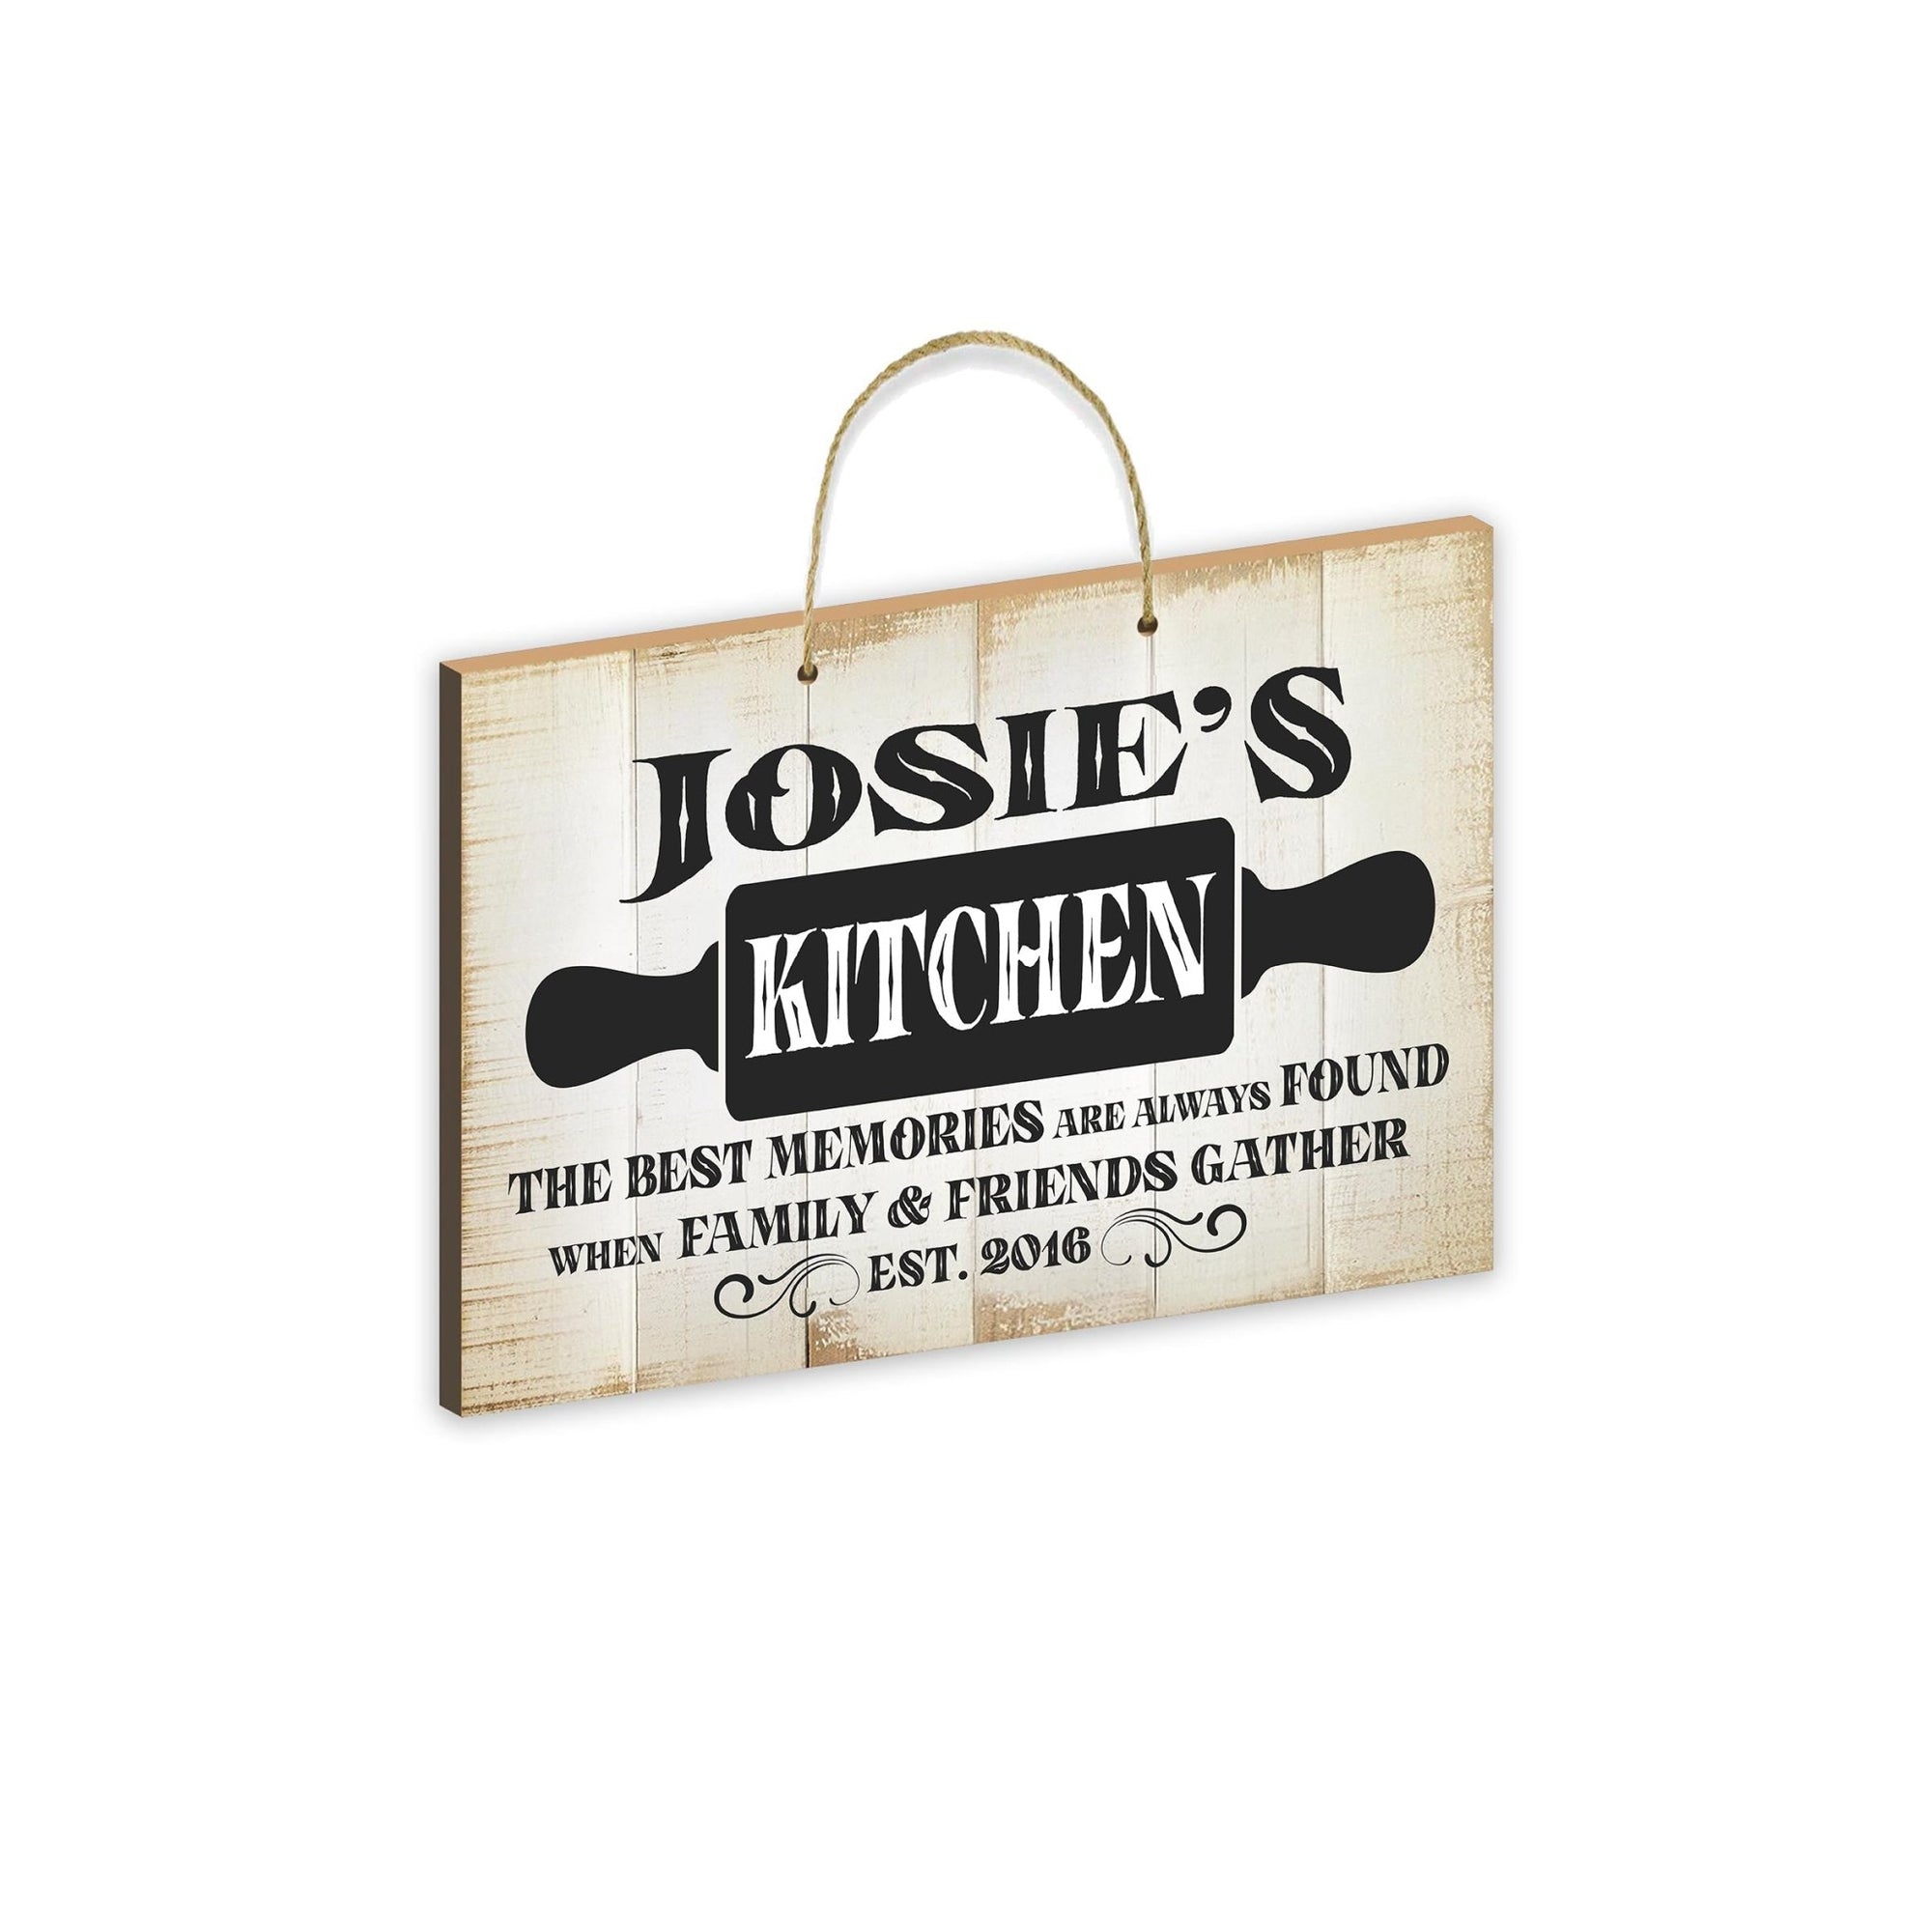 Inspirational Rustic Wooden Wall Hanging Rope Sign Kitchen Décor - The Best Memories [KITCHEN]